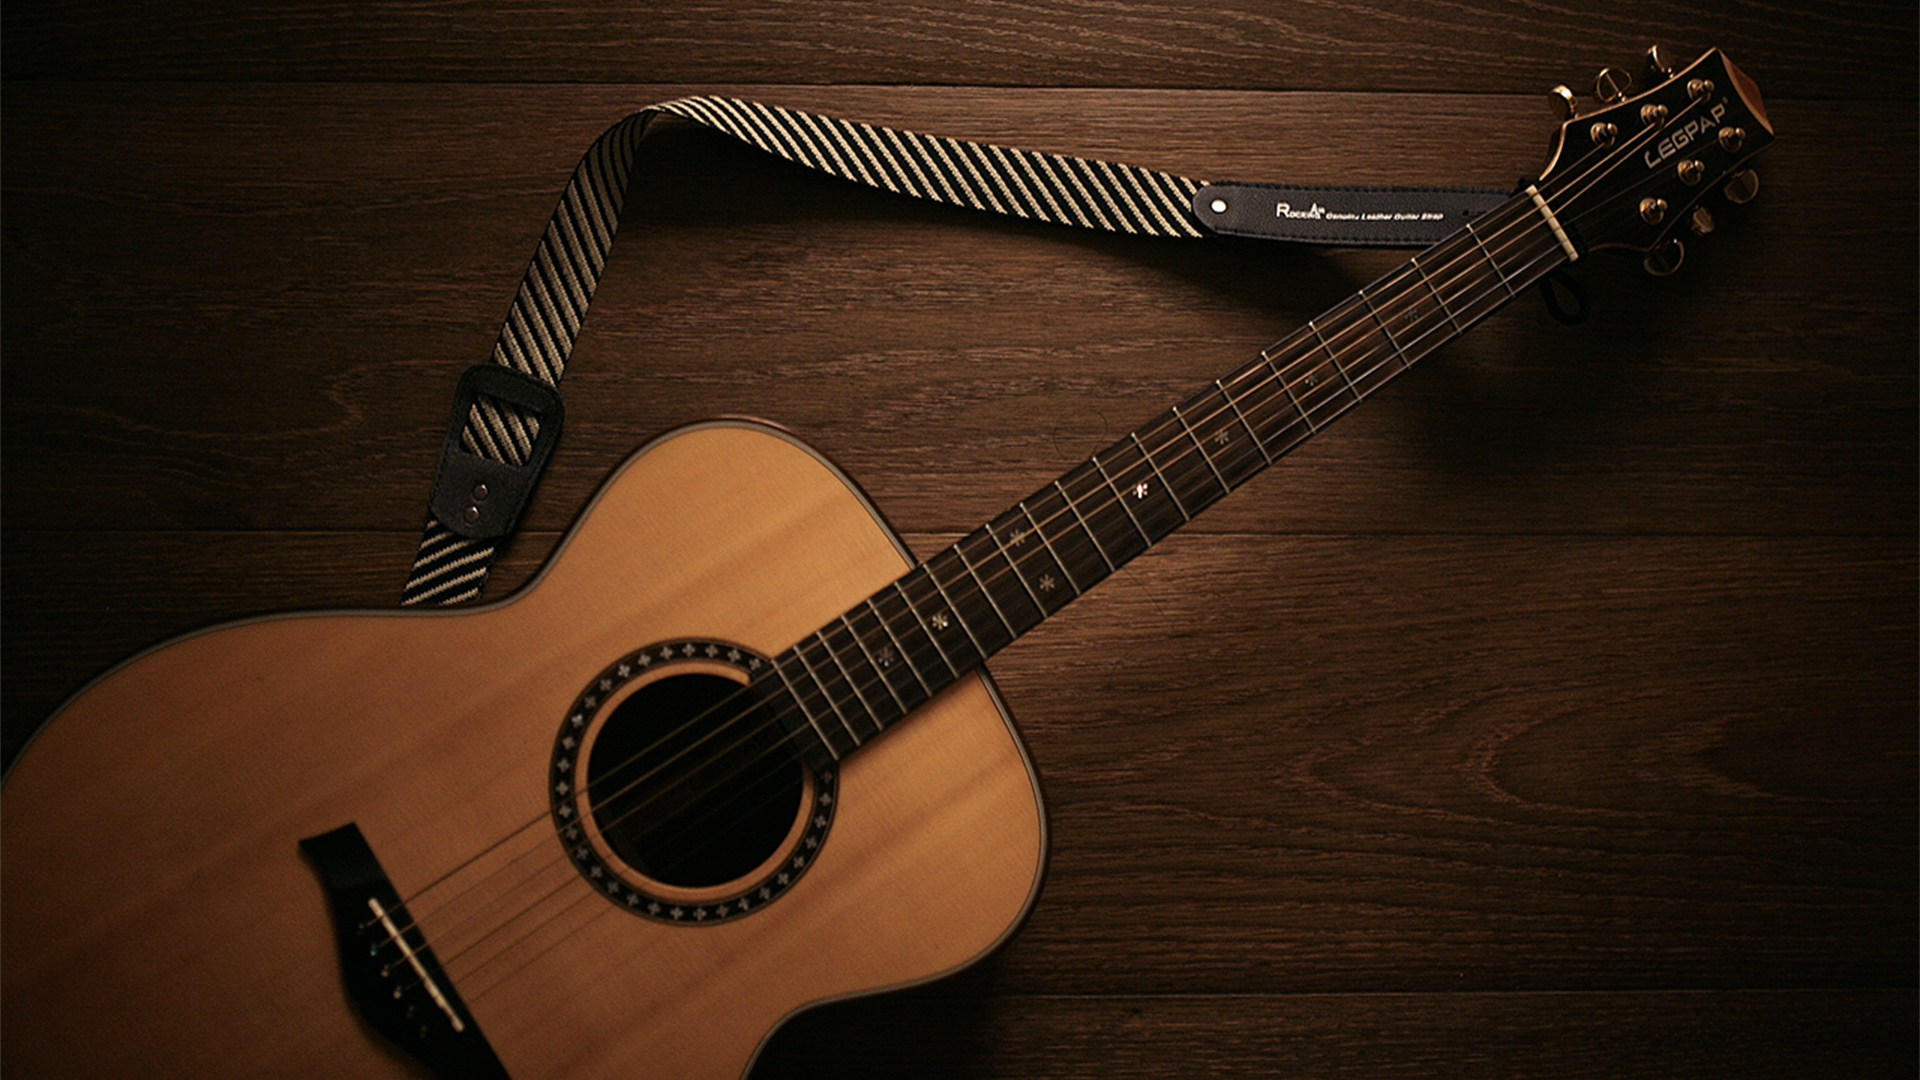 Acoustic guitar on a wooden background